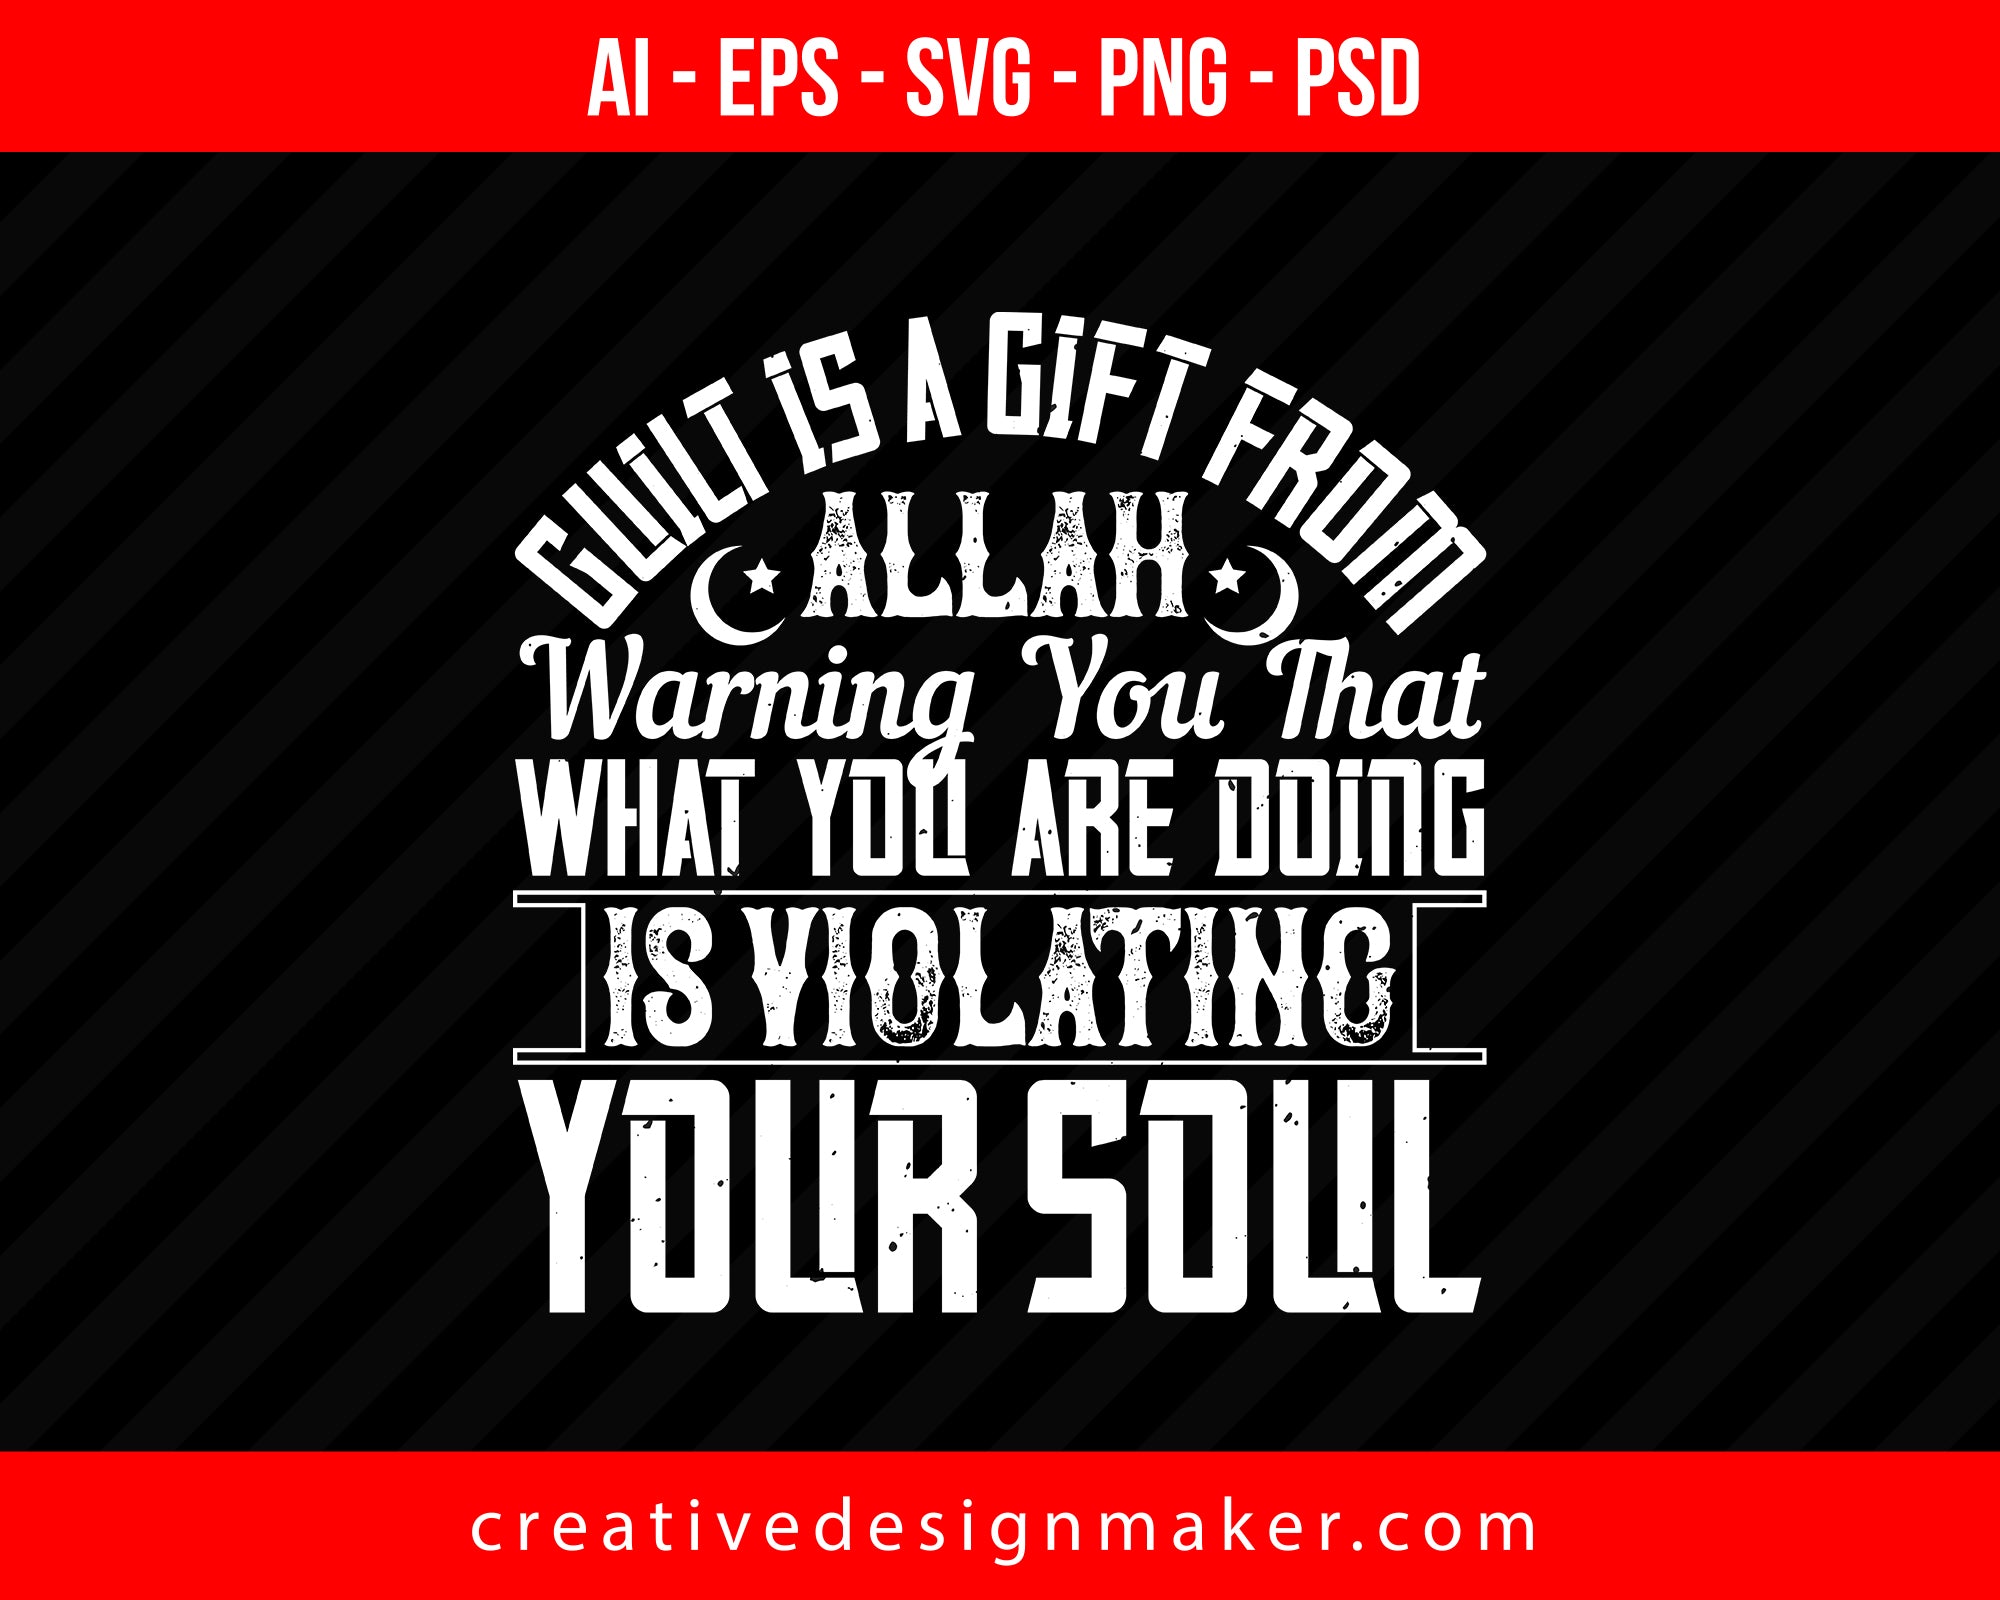 Guilt is a gift from ALLAH warning you that what you are doing is violating your soul Islamic Print Ready Editable T-Shirt SVG Design!